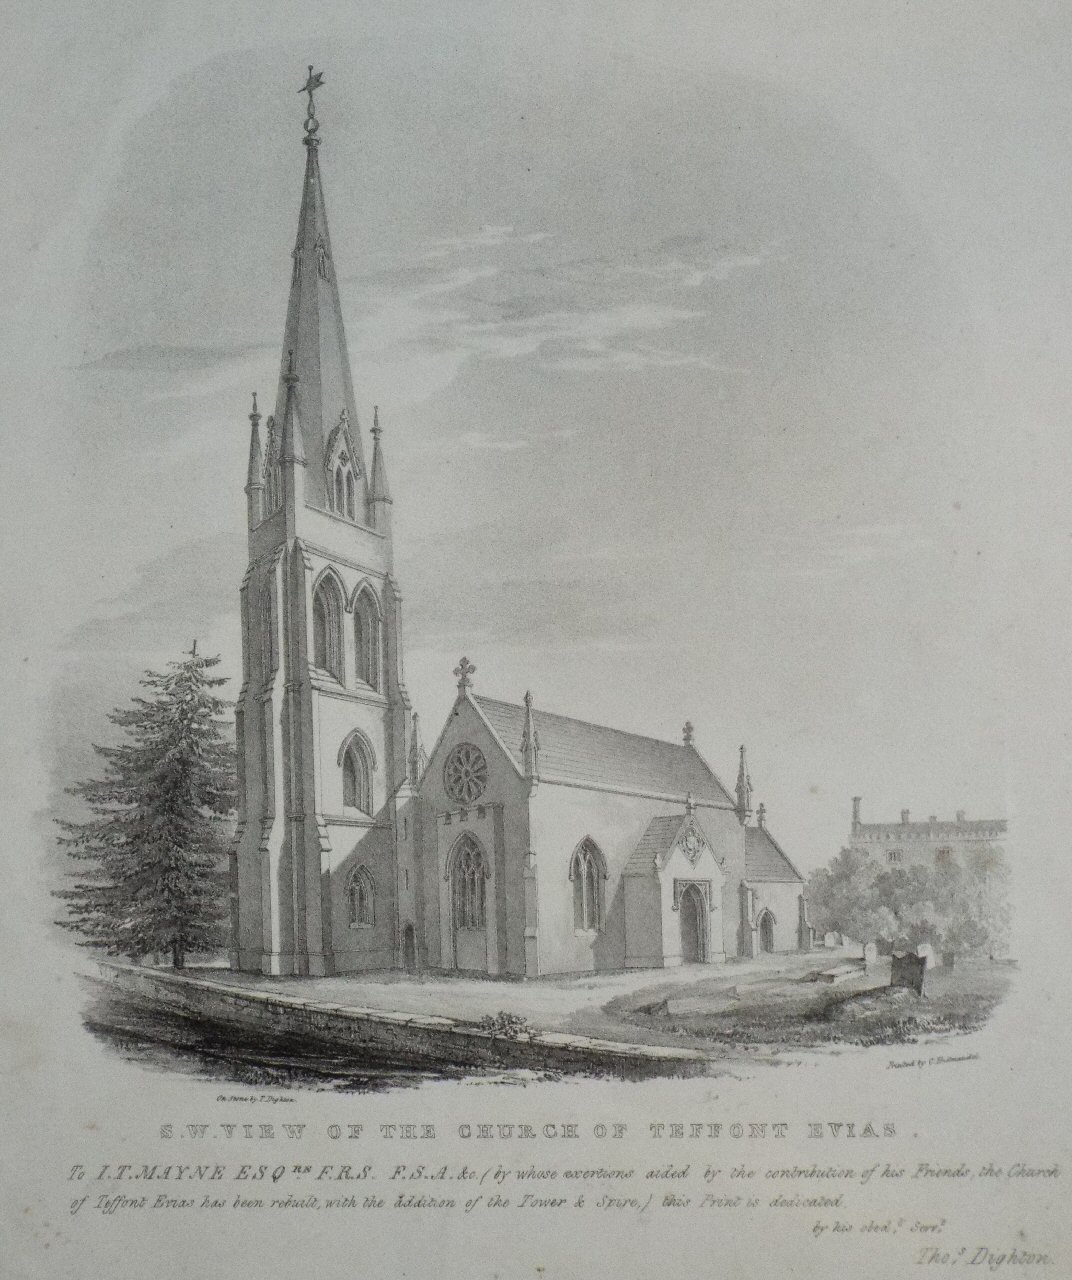 Lithograph - S.W. View of the Church of Teffont Evias